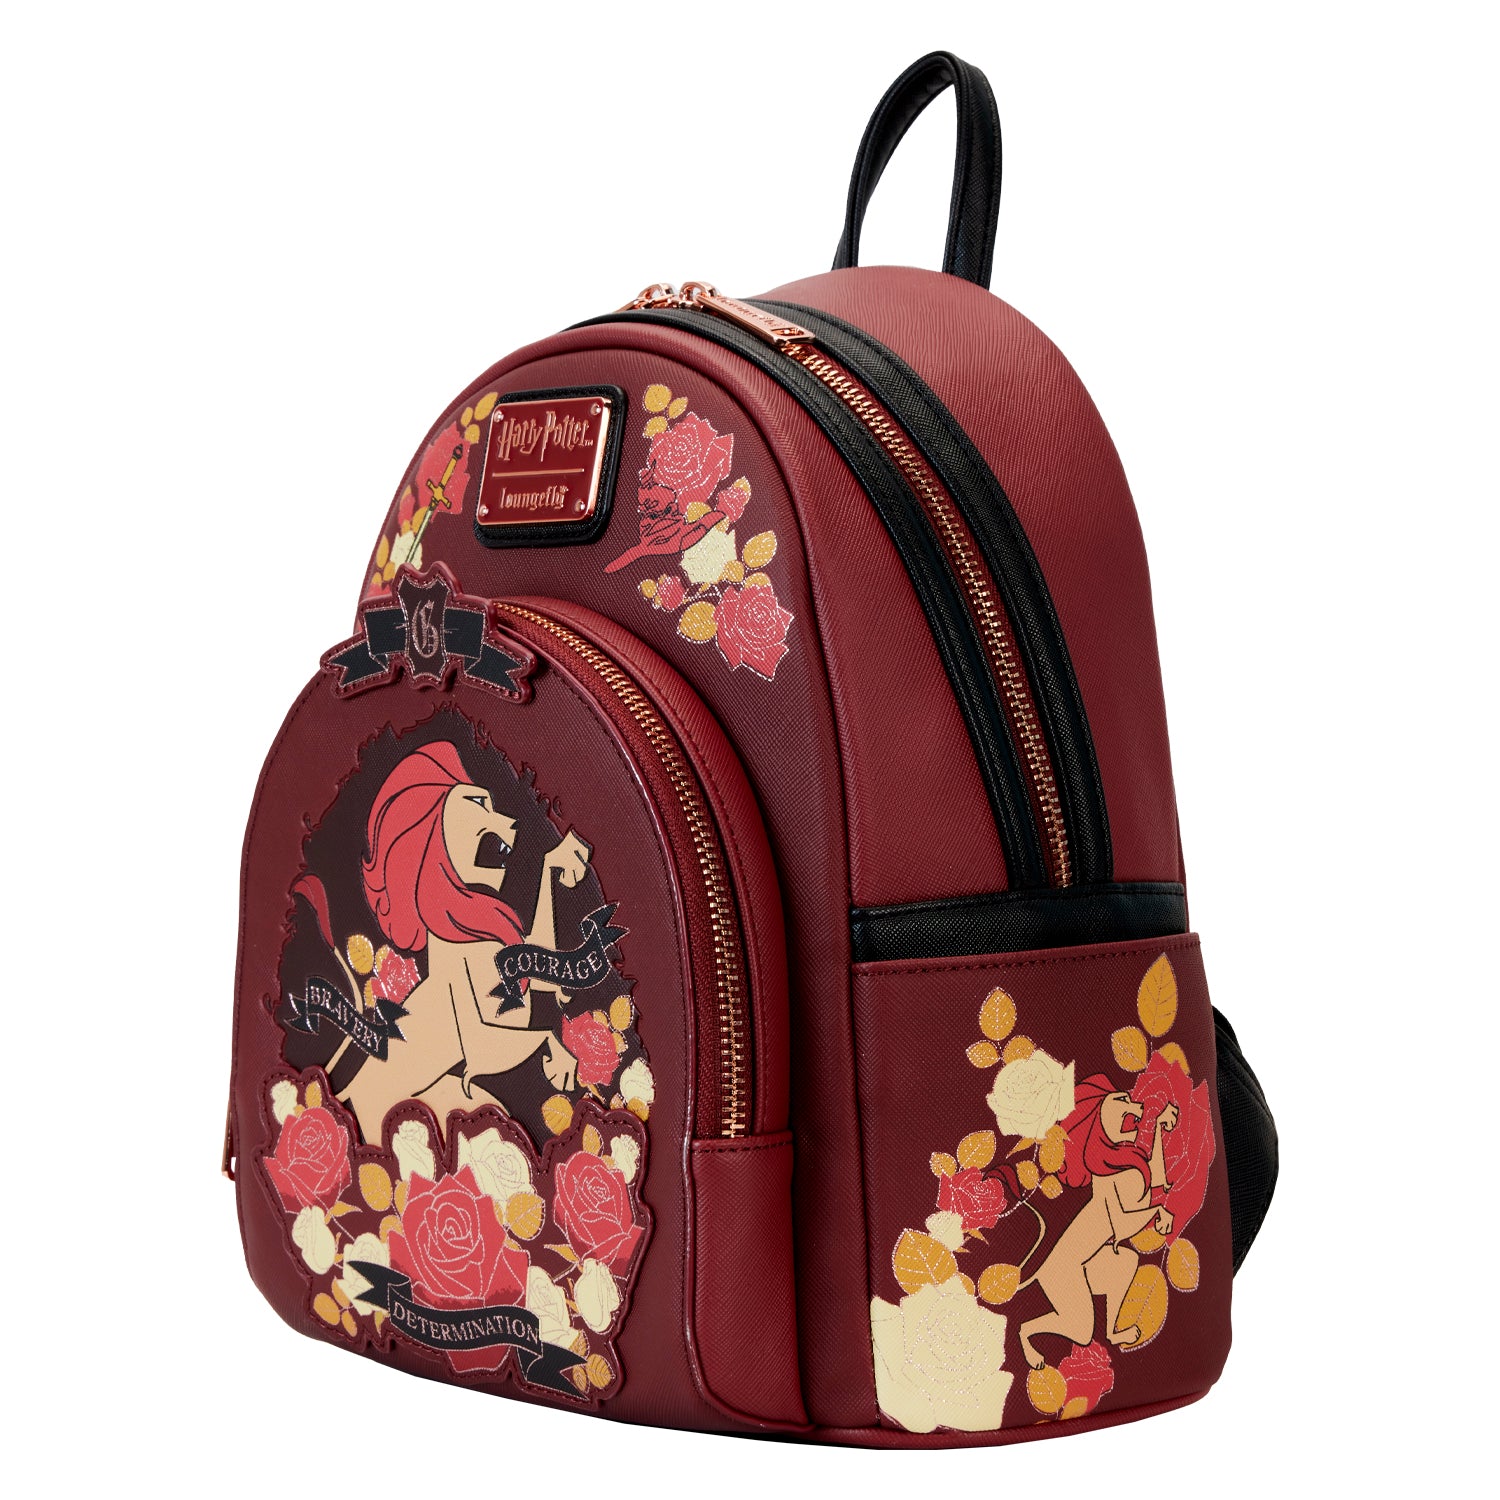 Loungefly Harry Potter Gryffindor Tattoo Mini Backpack